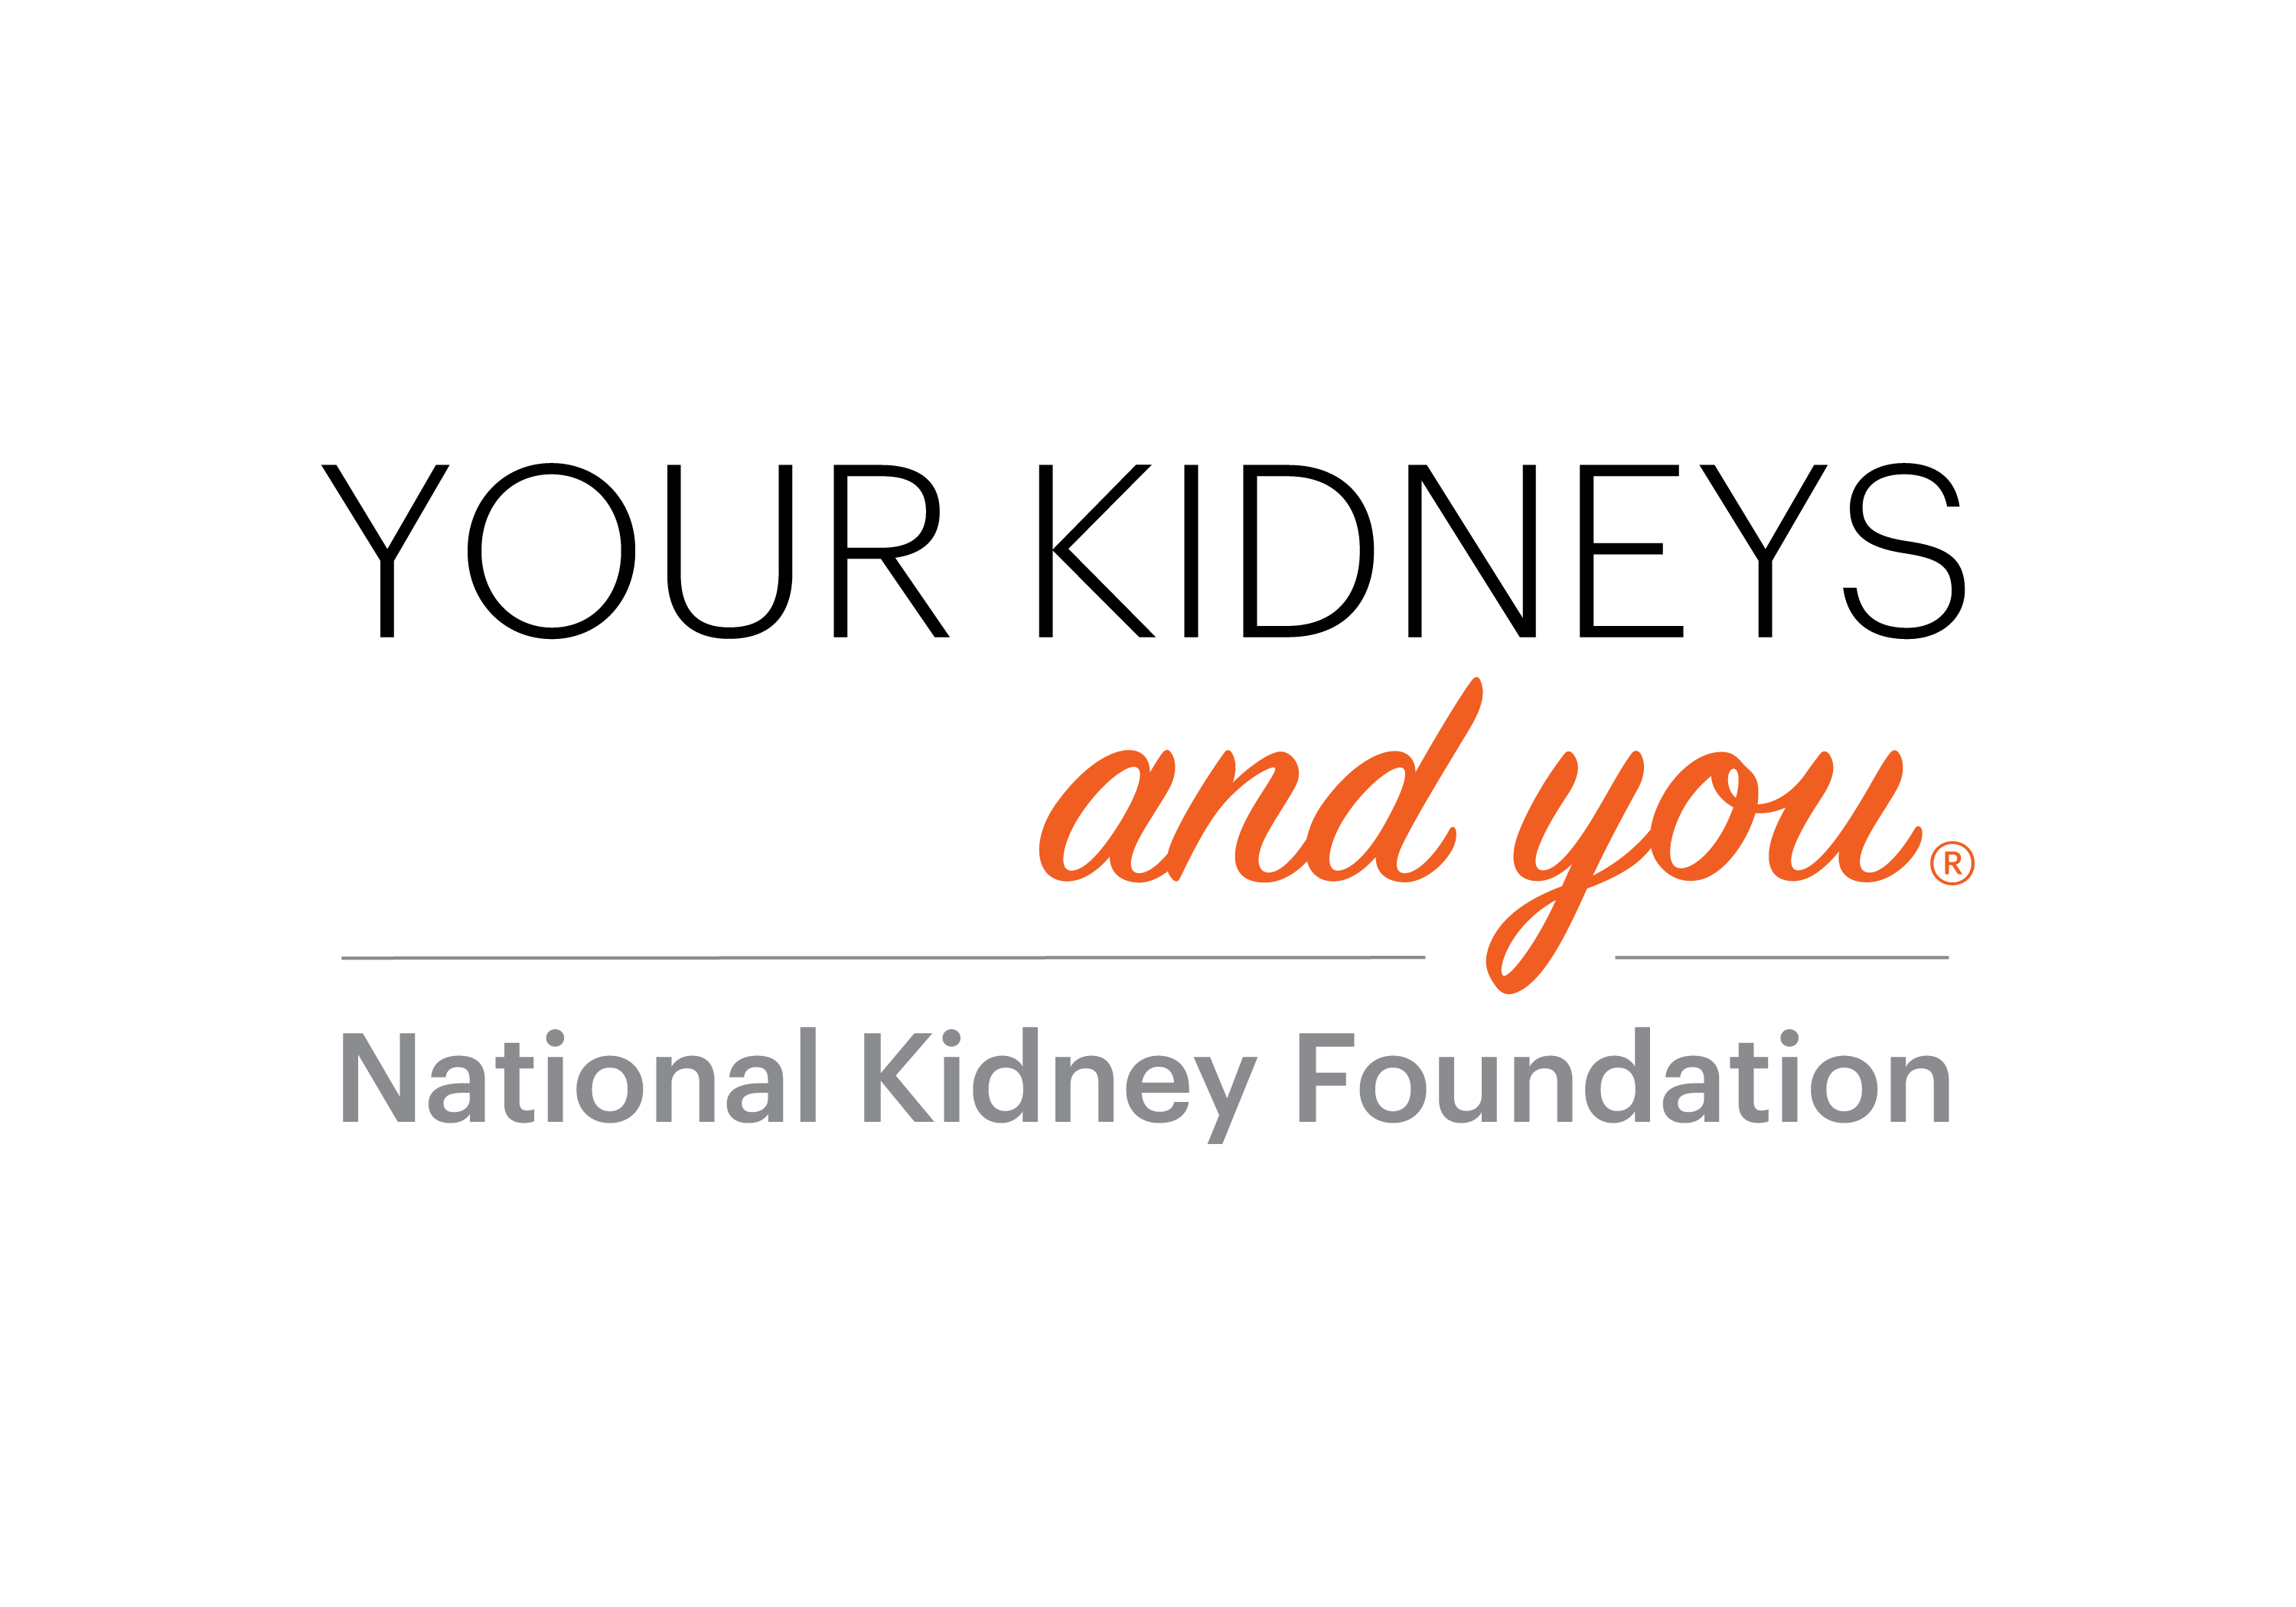 NKF - Your Kidneys and You